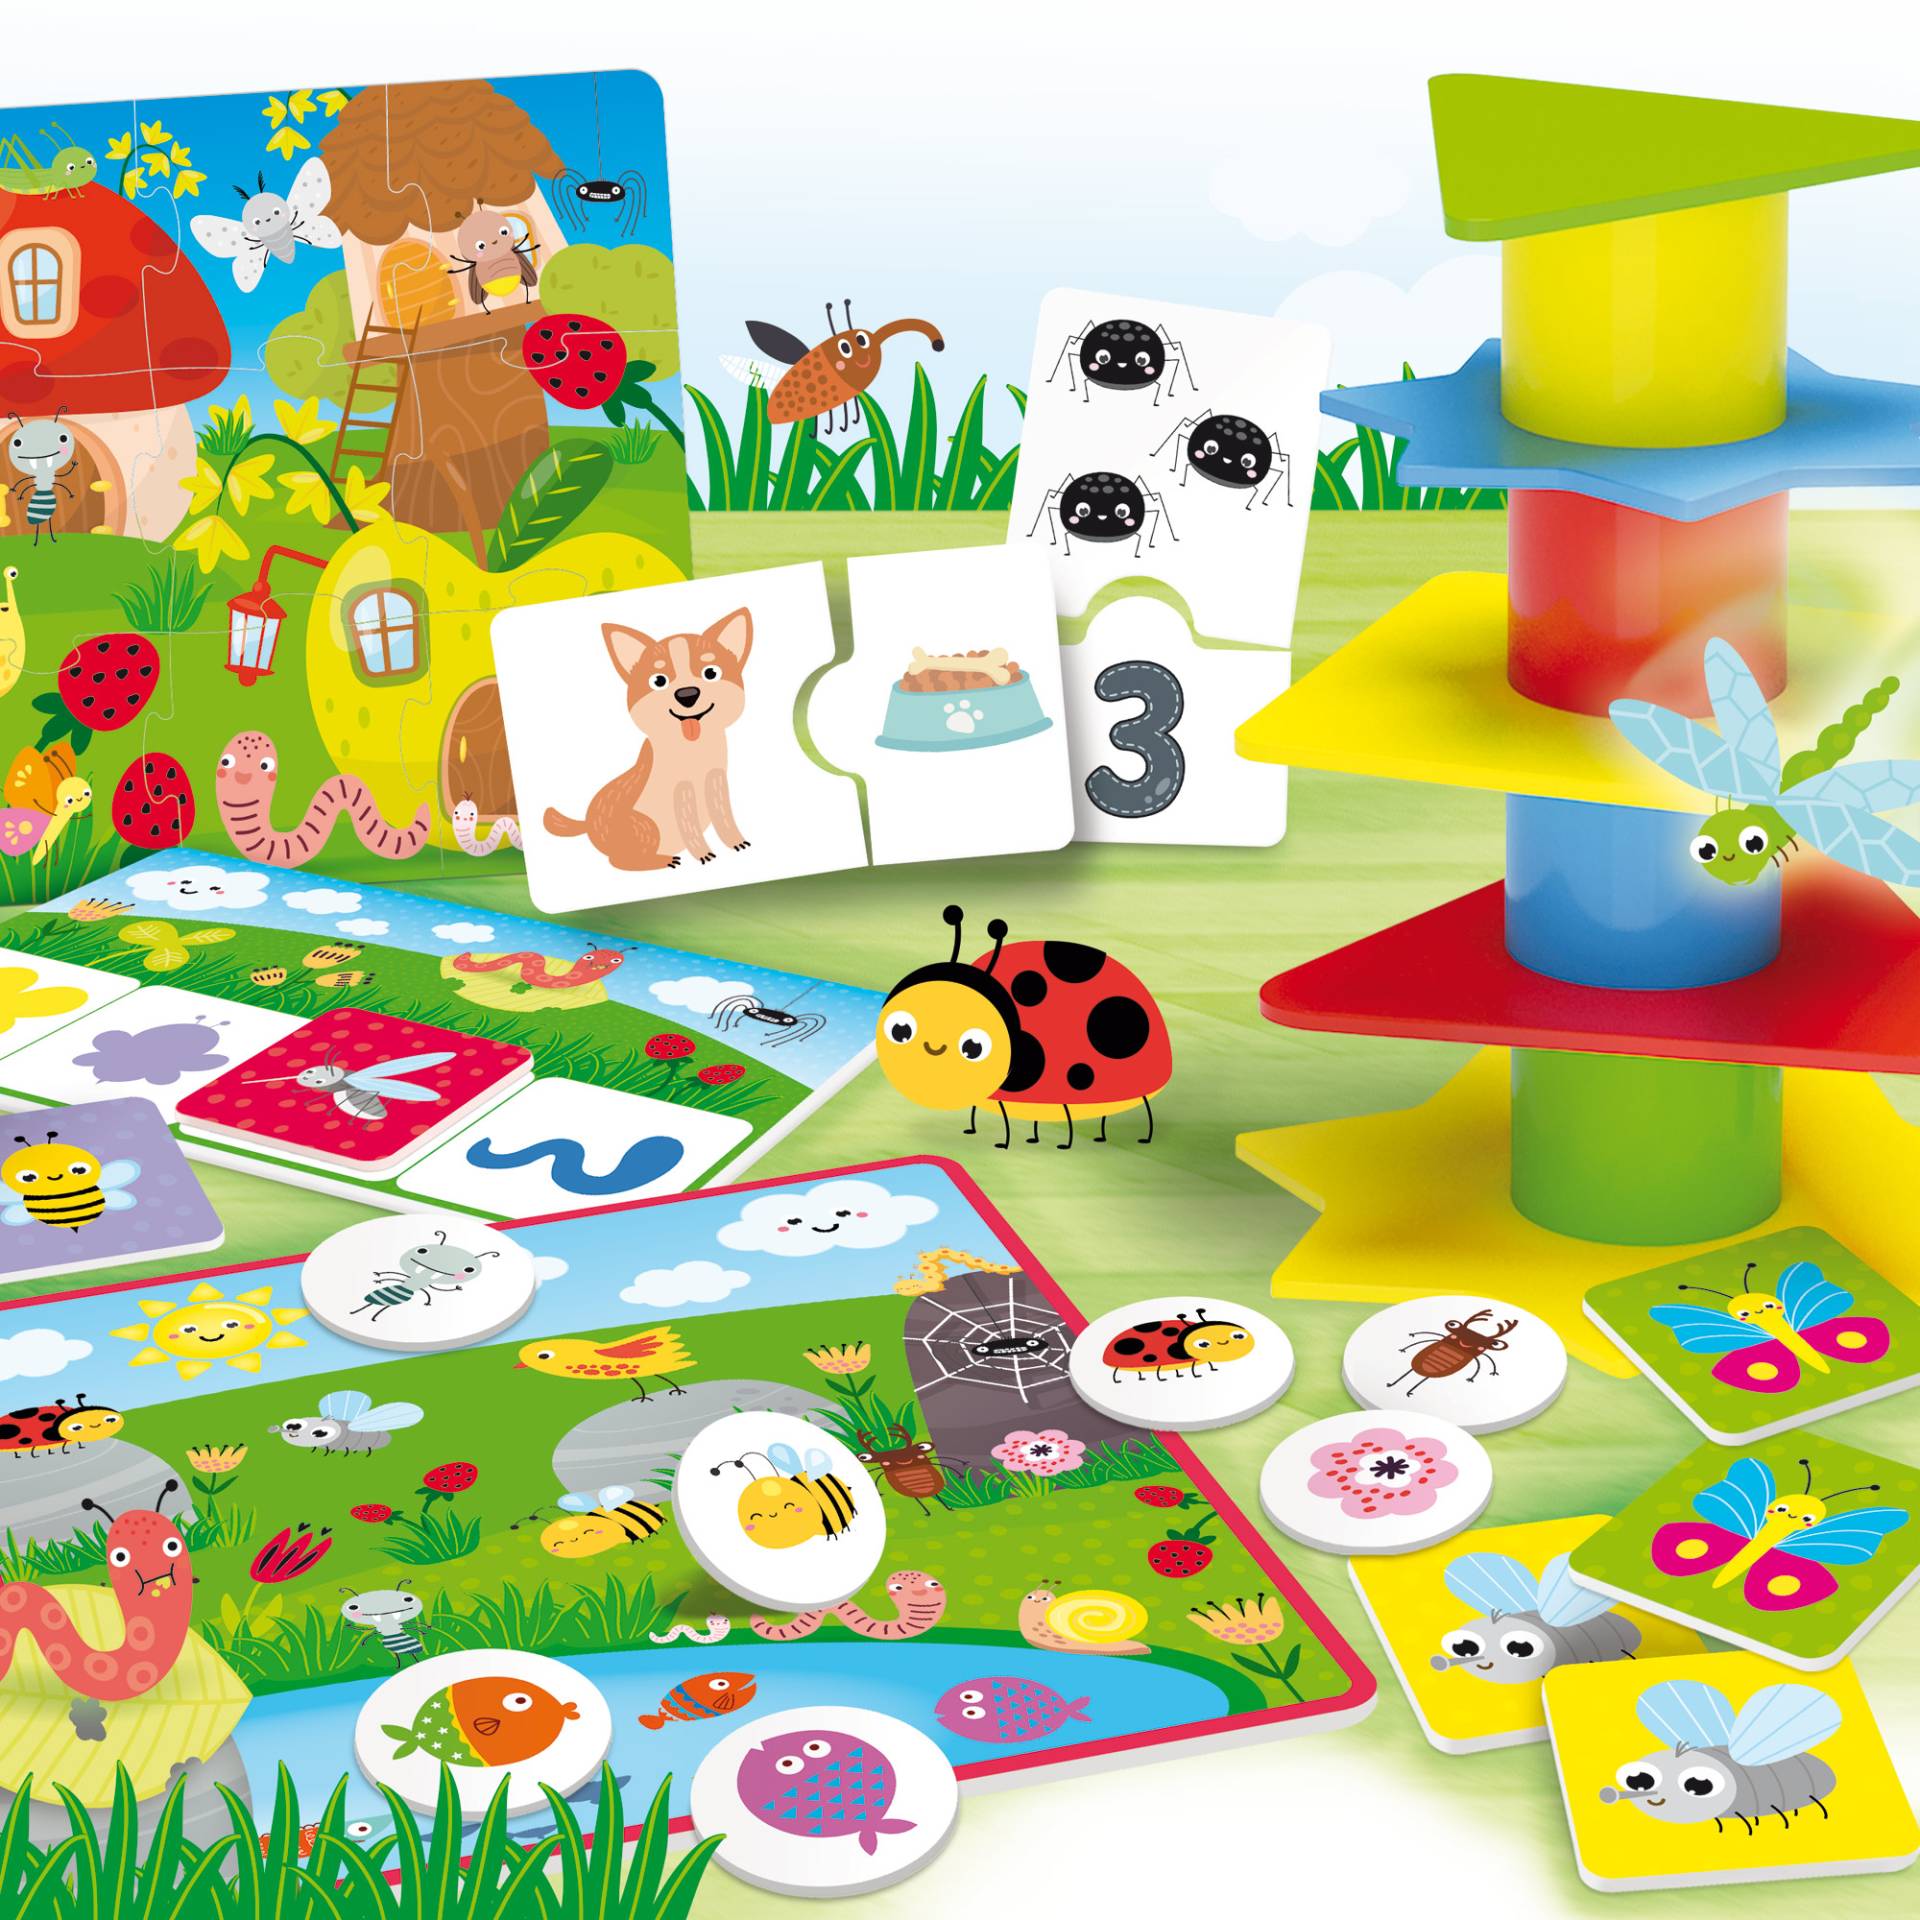 Foto 2 des Spiels CAROTINA BABY EDUCATIONAL GAMES COLLECTION